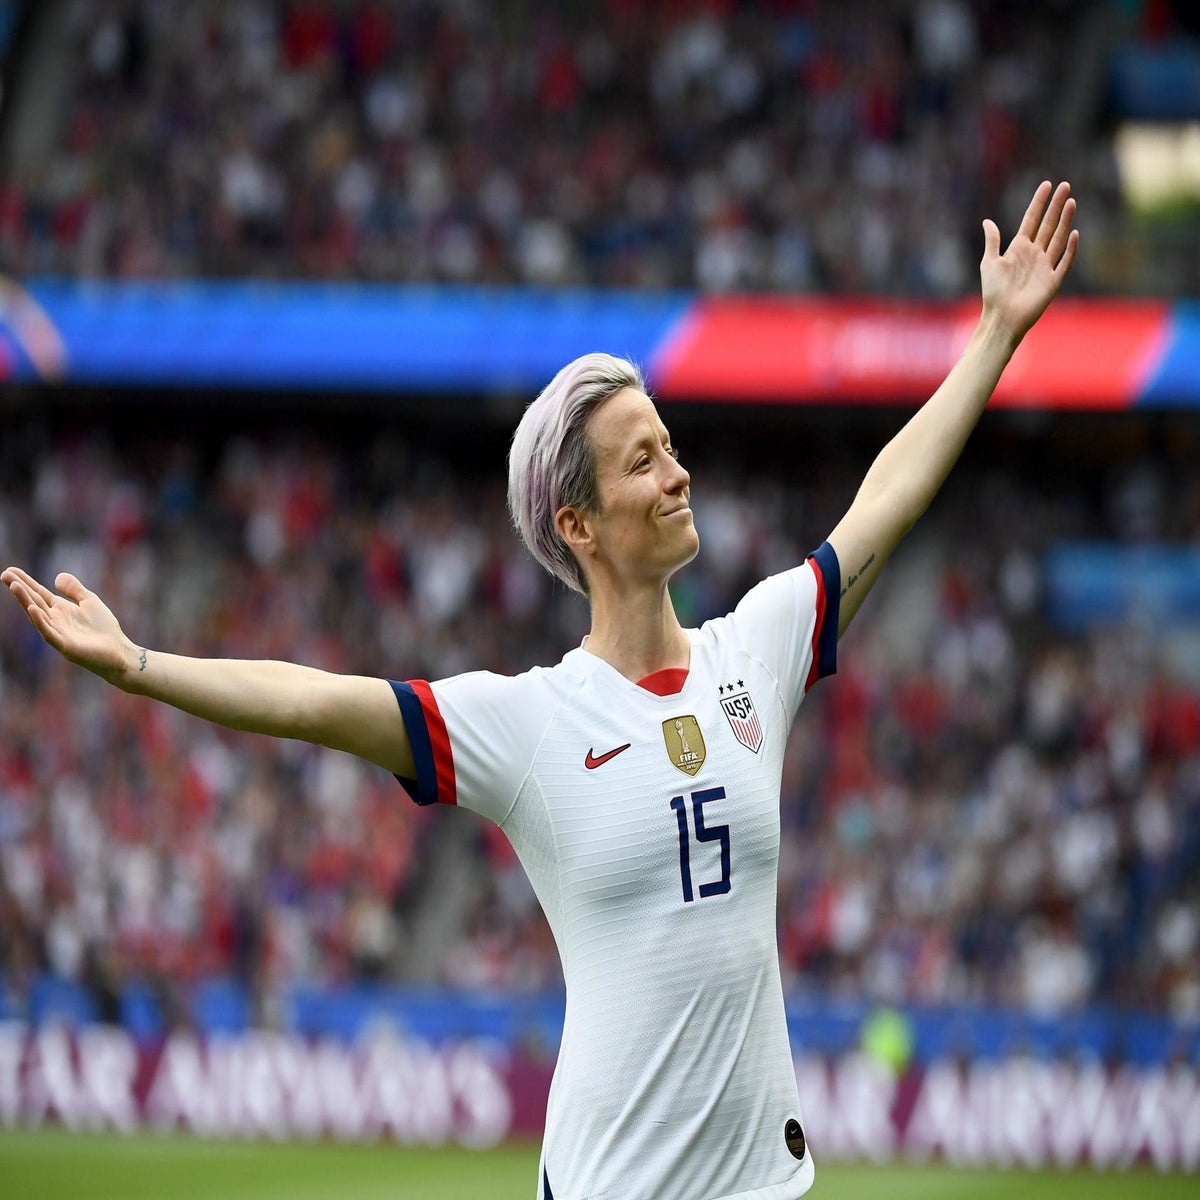 US women's soccer jersey is No. 1 Nike seller as team gears up for